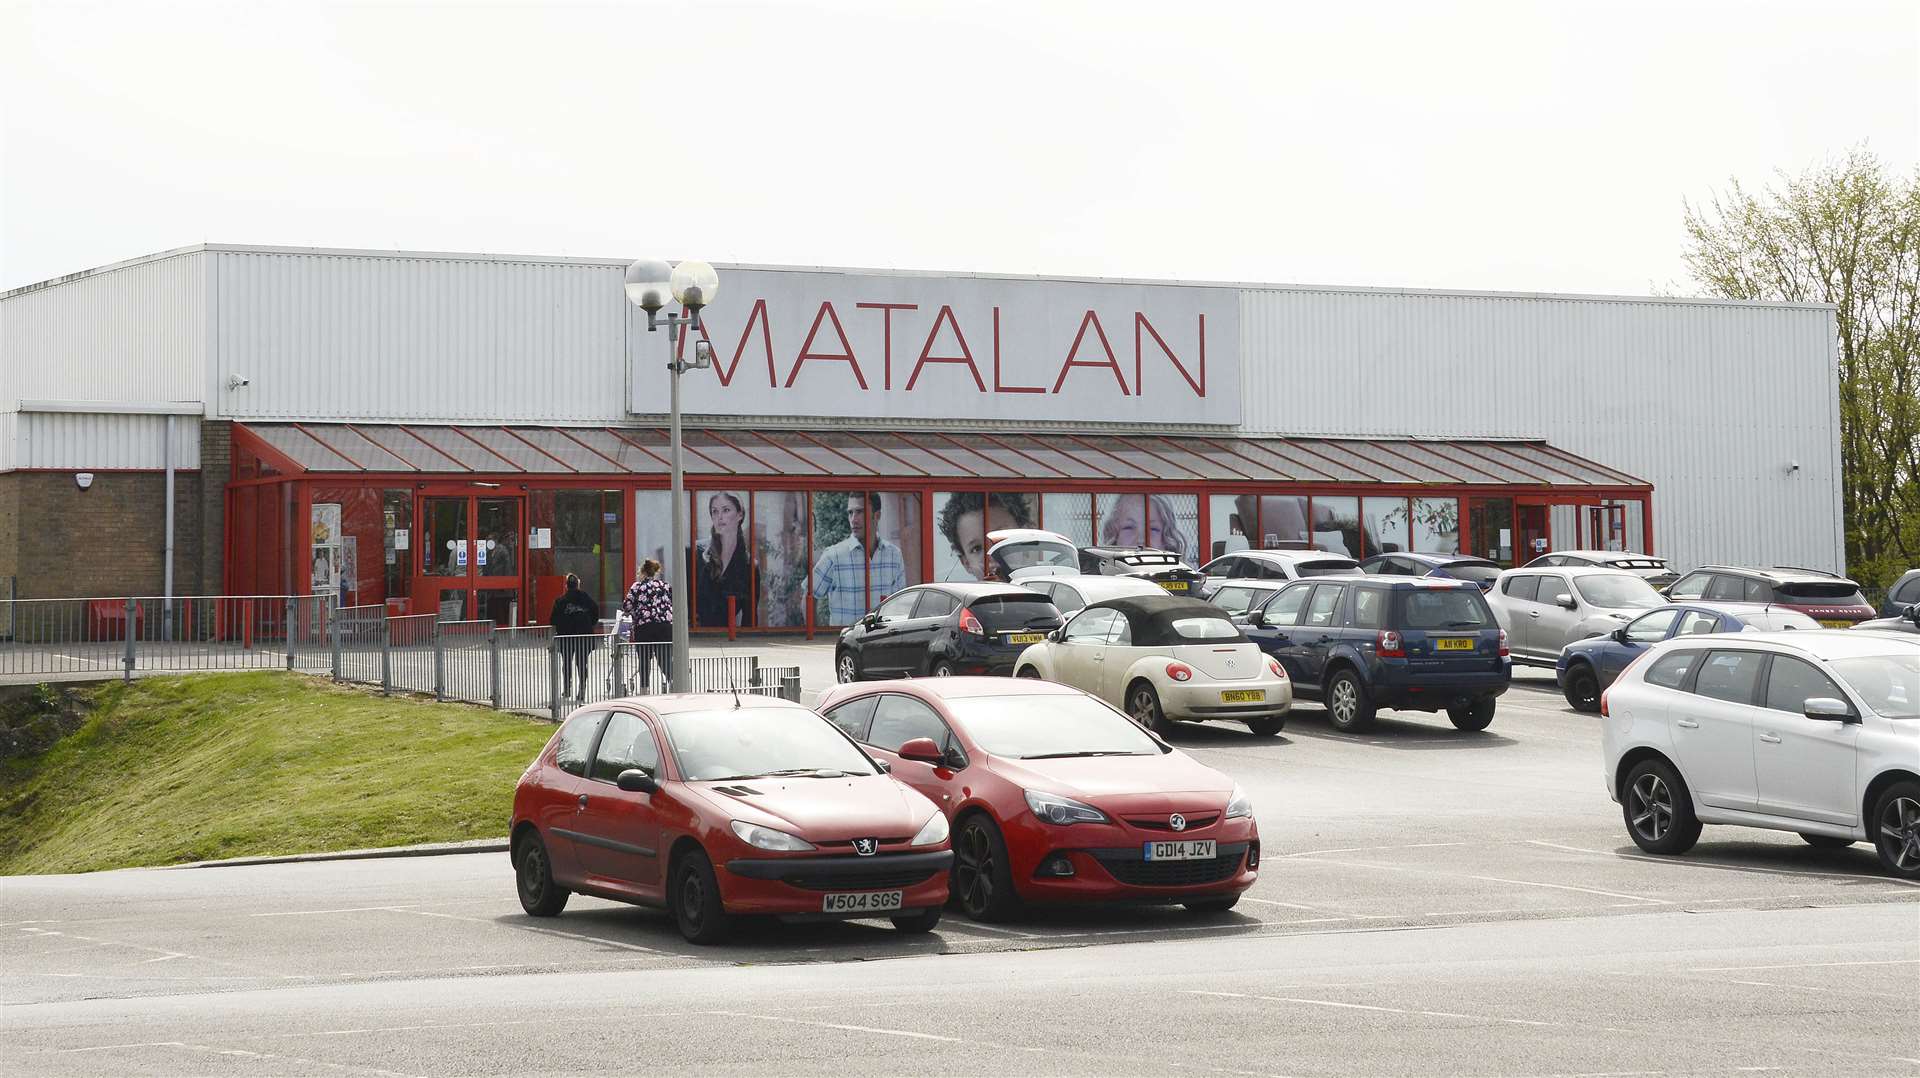 The Matalan store in Brookfield Road was put on the market in February